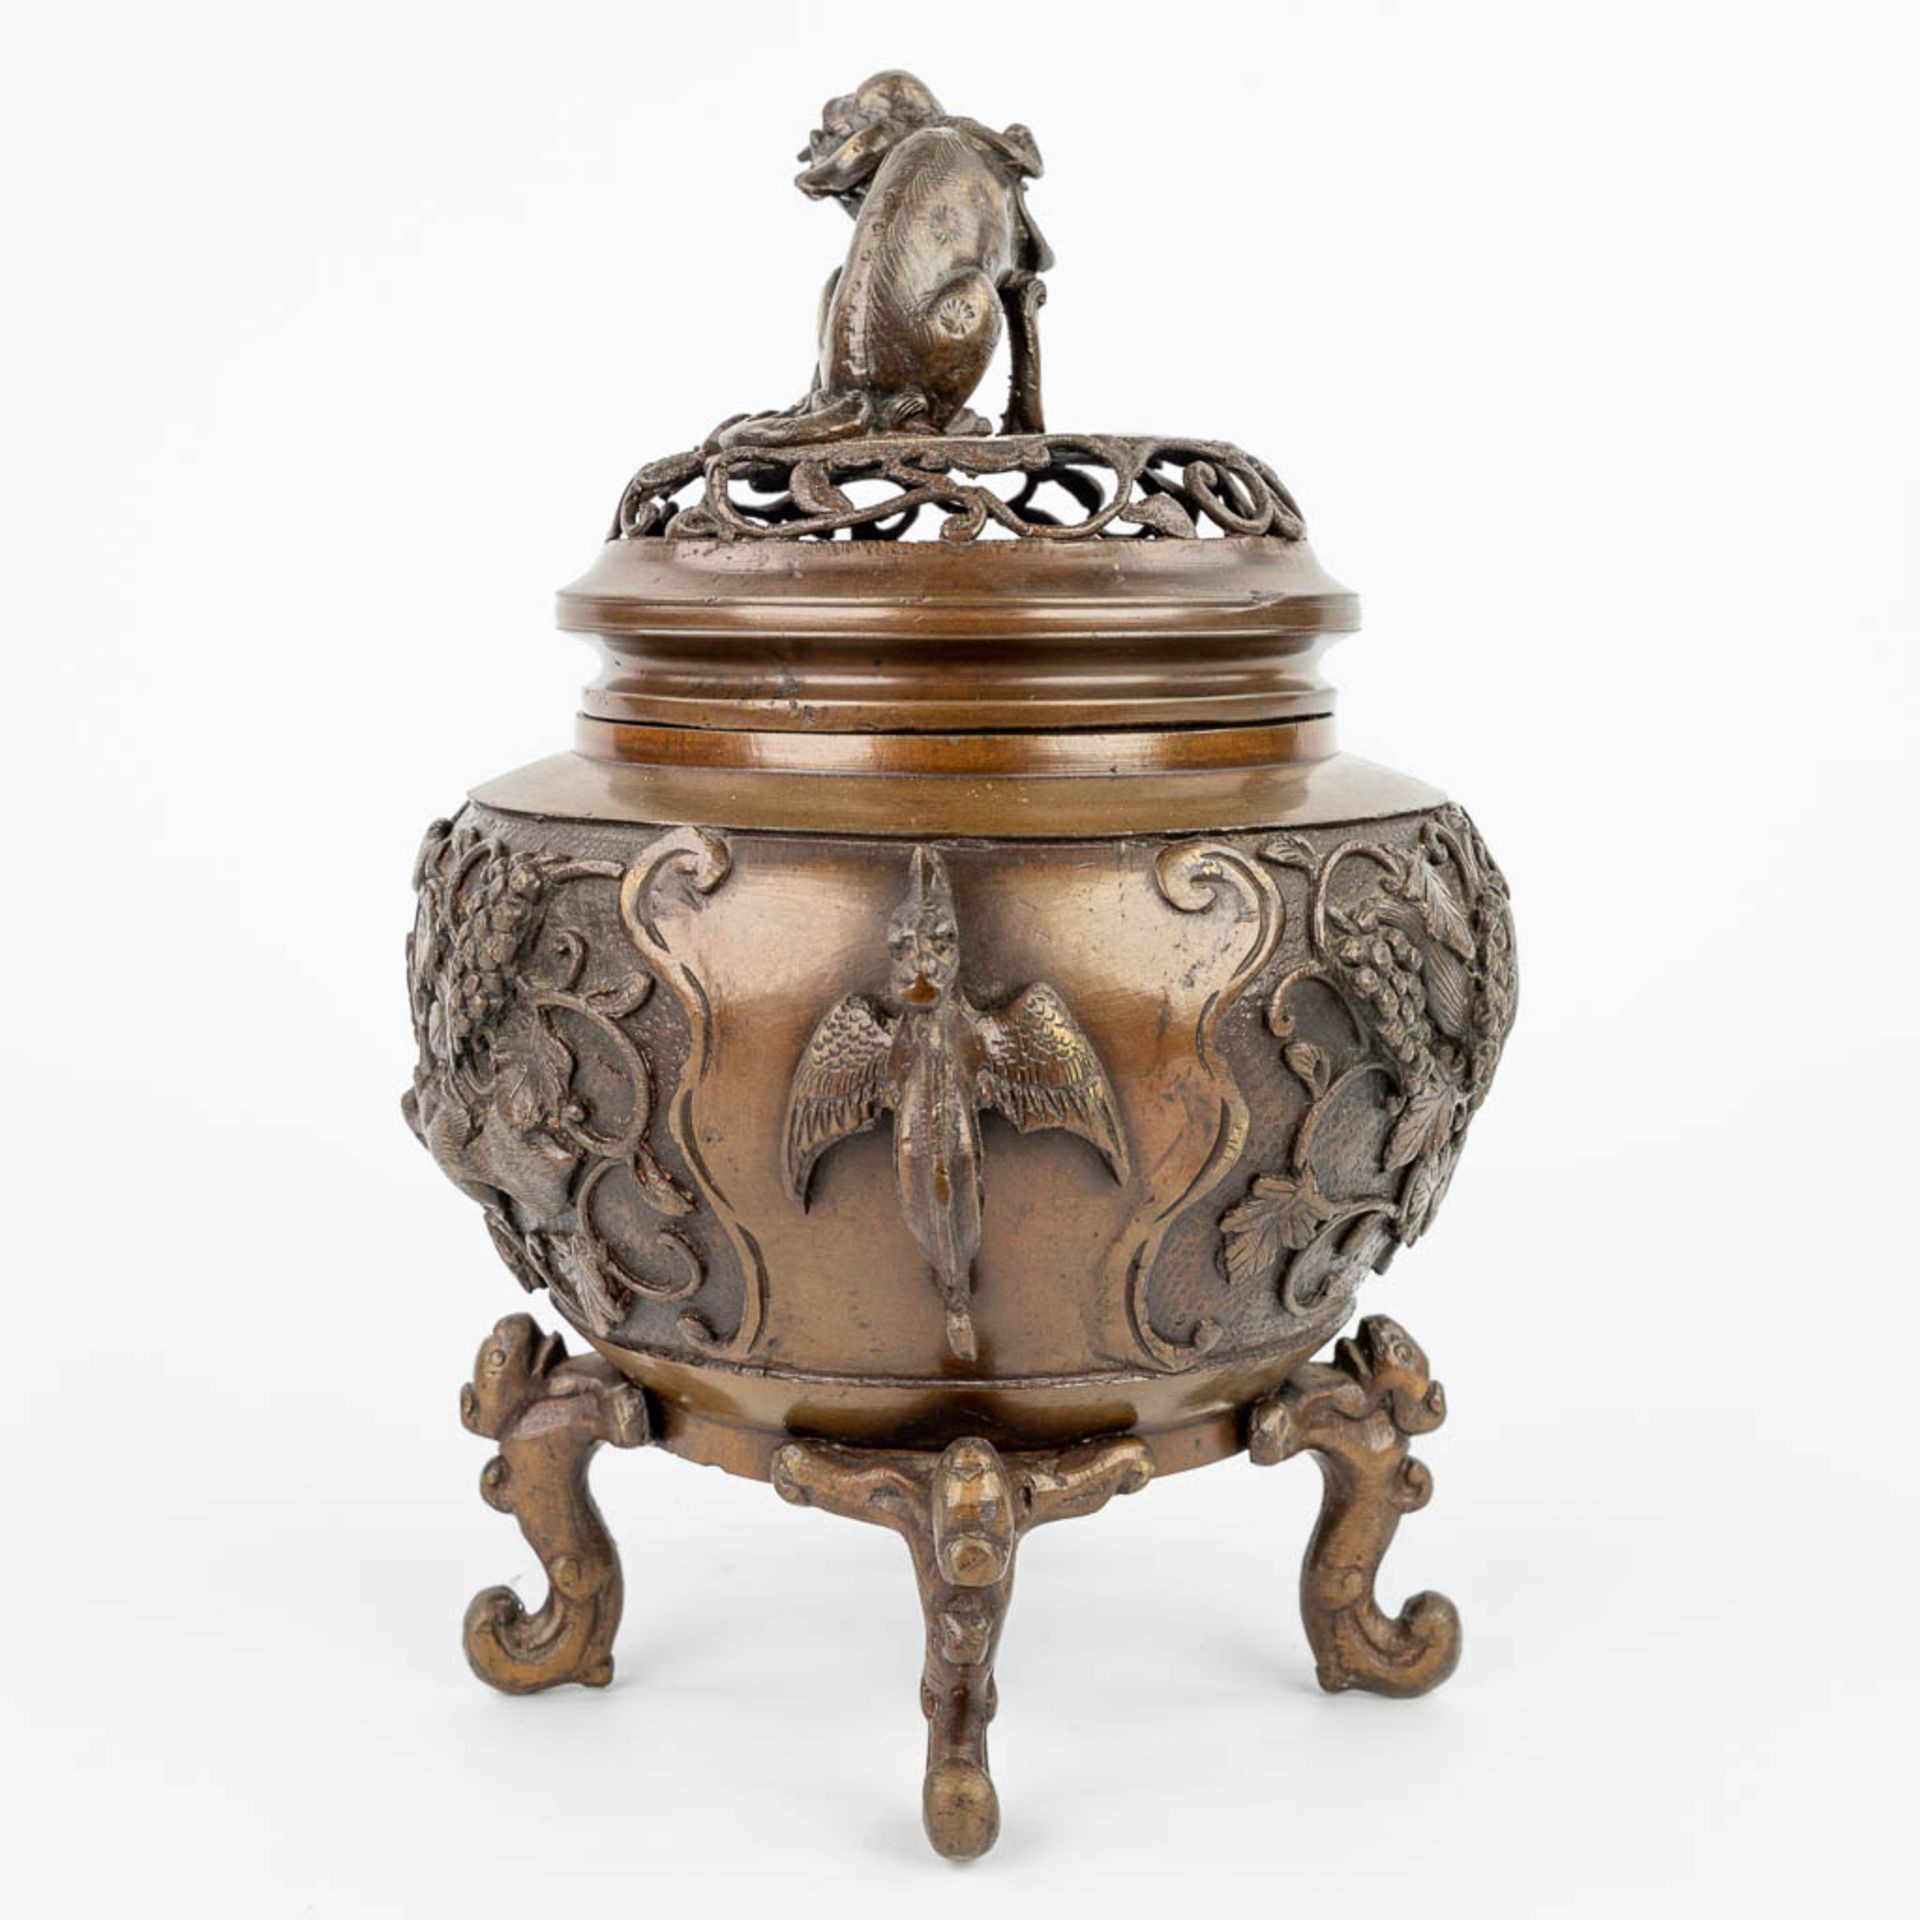 An Oriental Brûle Parfum made of patinated bronze and decorated with figurines. (H:28cm) - Image 16 of 16